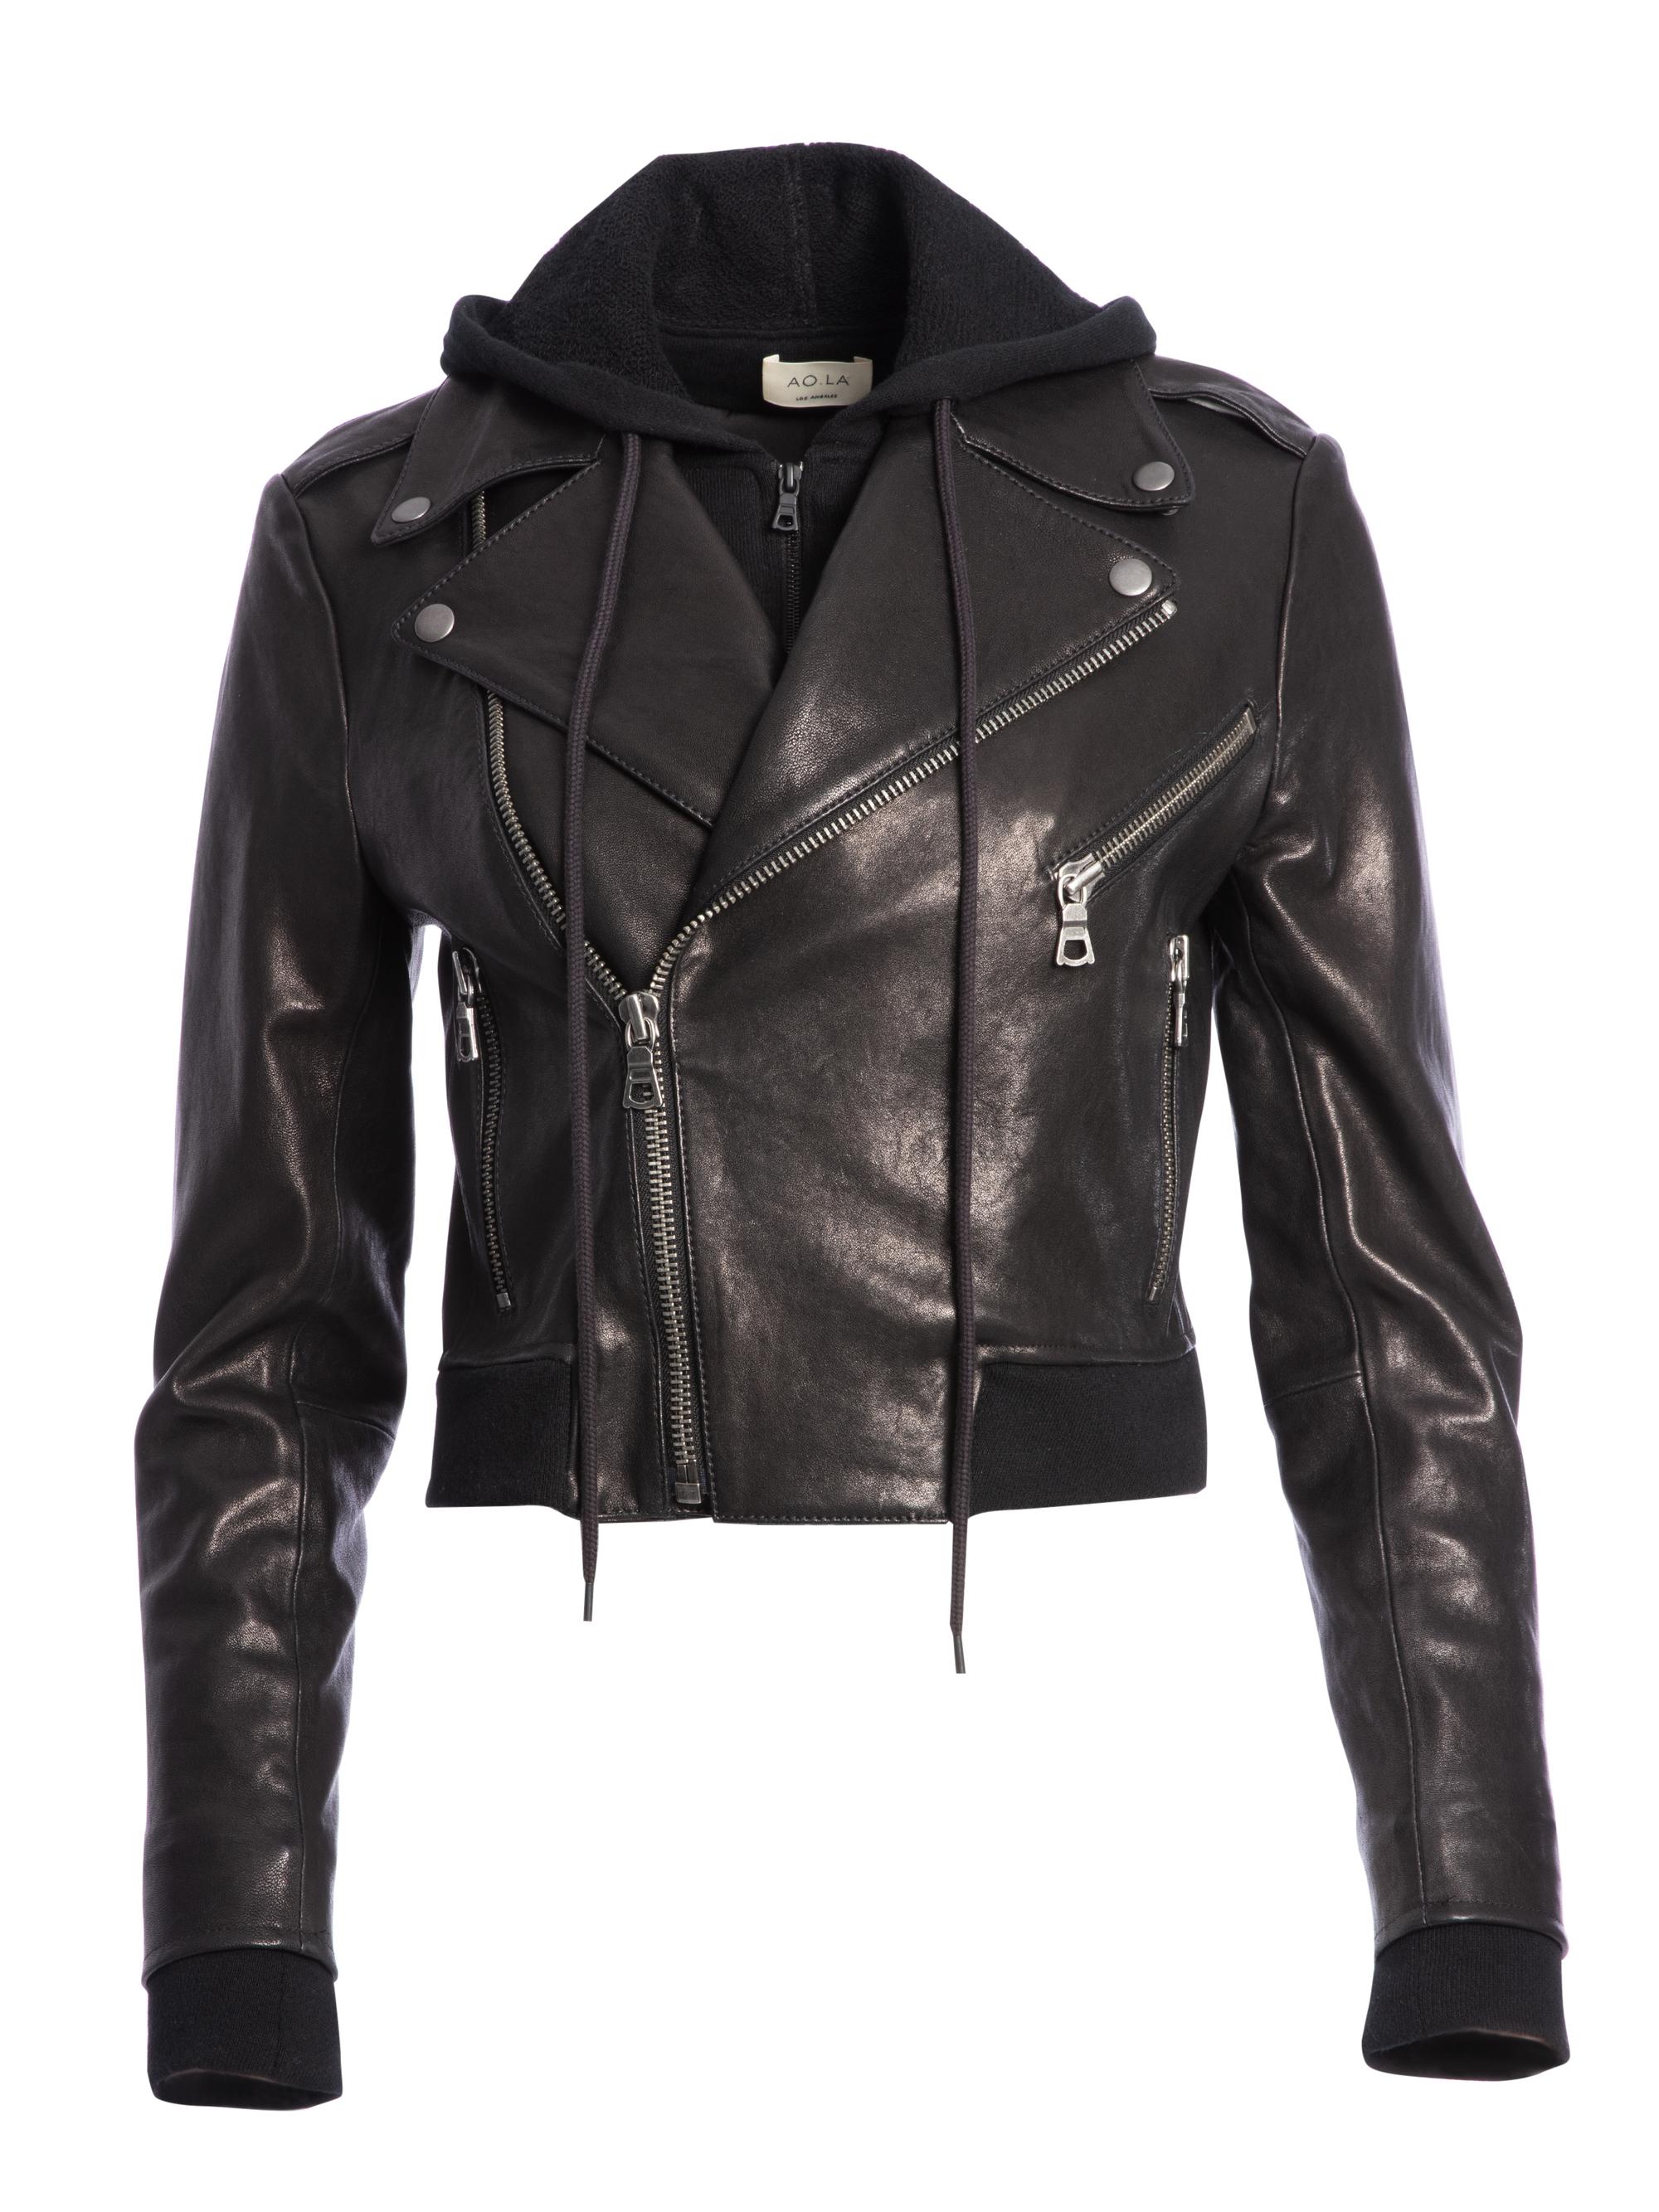 Alice + Olivia Avril Hoodie Leather Jacket in Black - Lyst